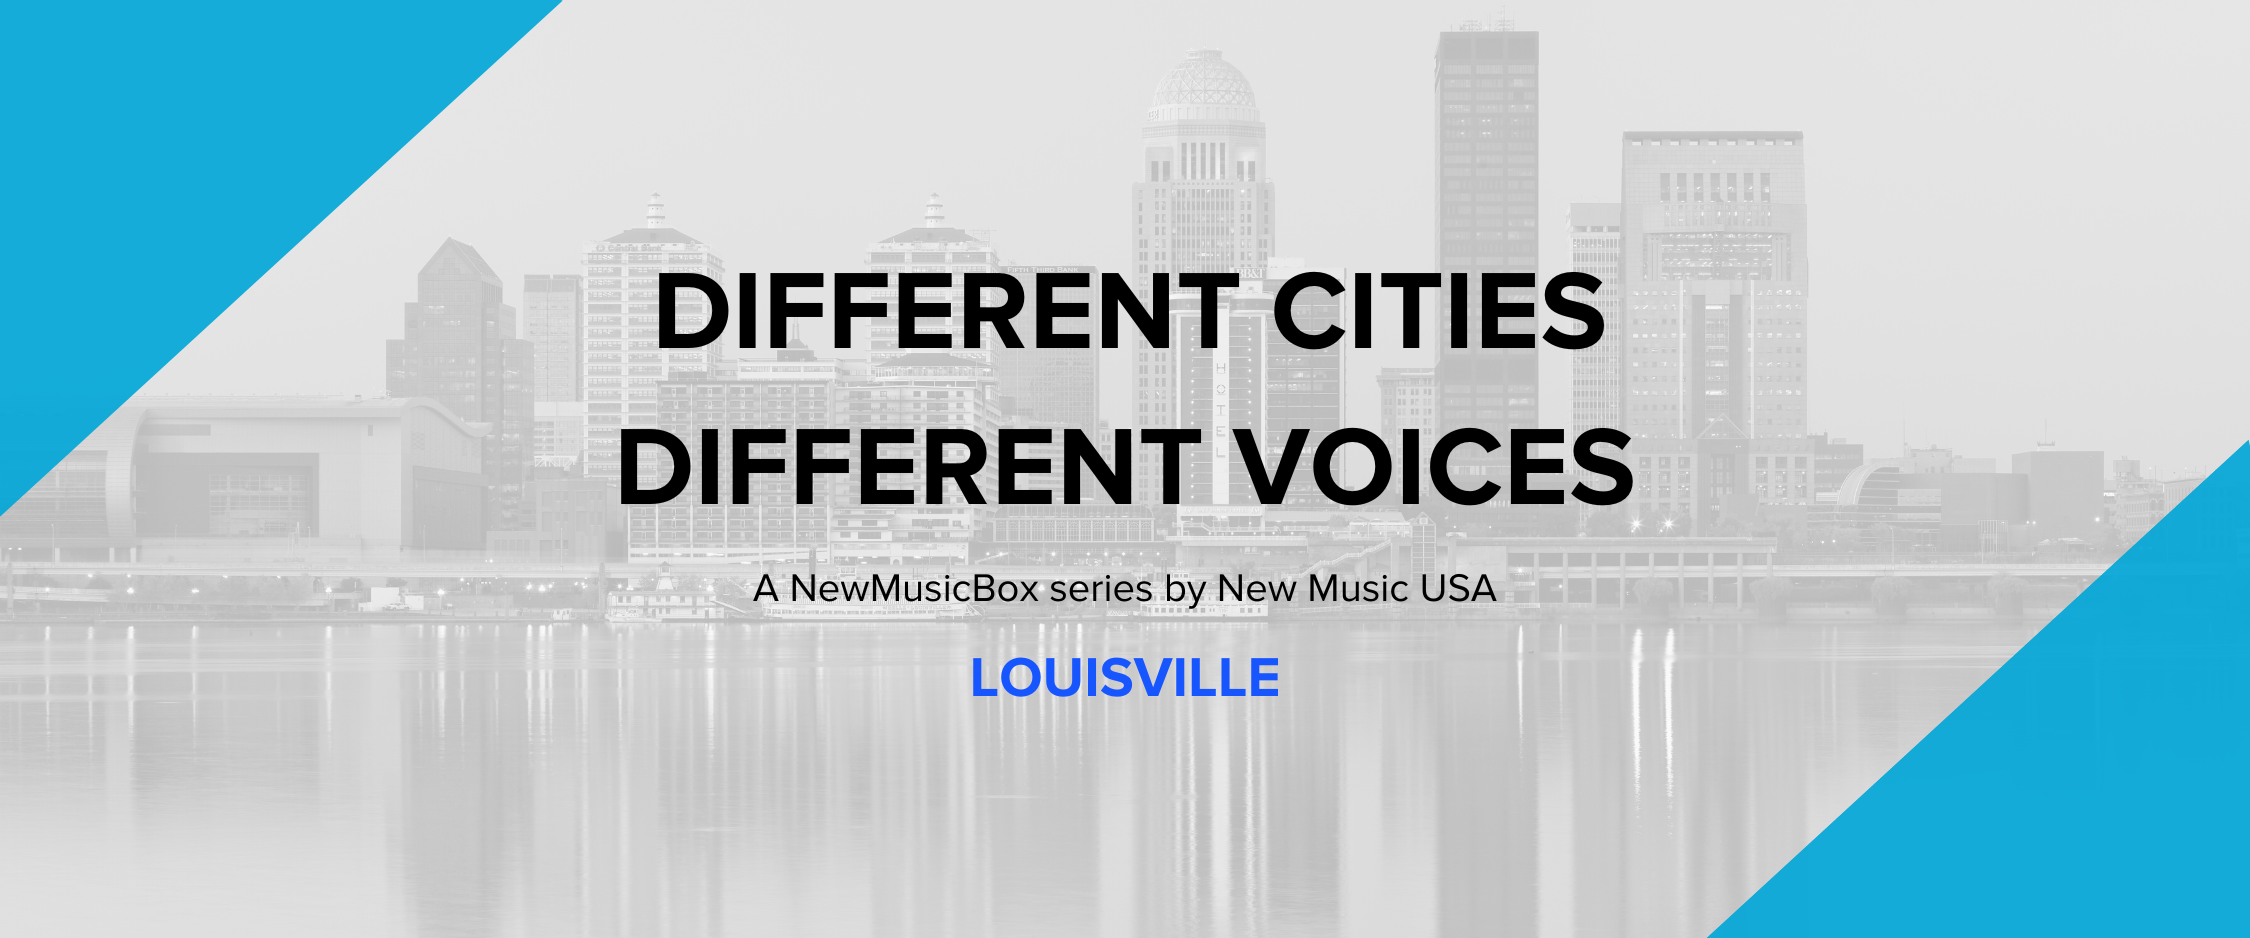 Skyline of Louisville KY with DIFFERENT CITIES DIFFERENT VOICES logo